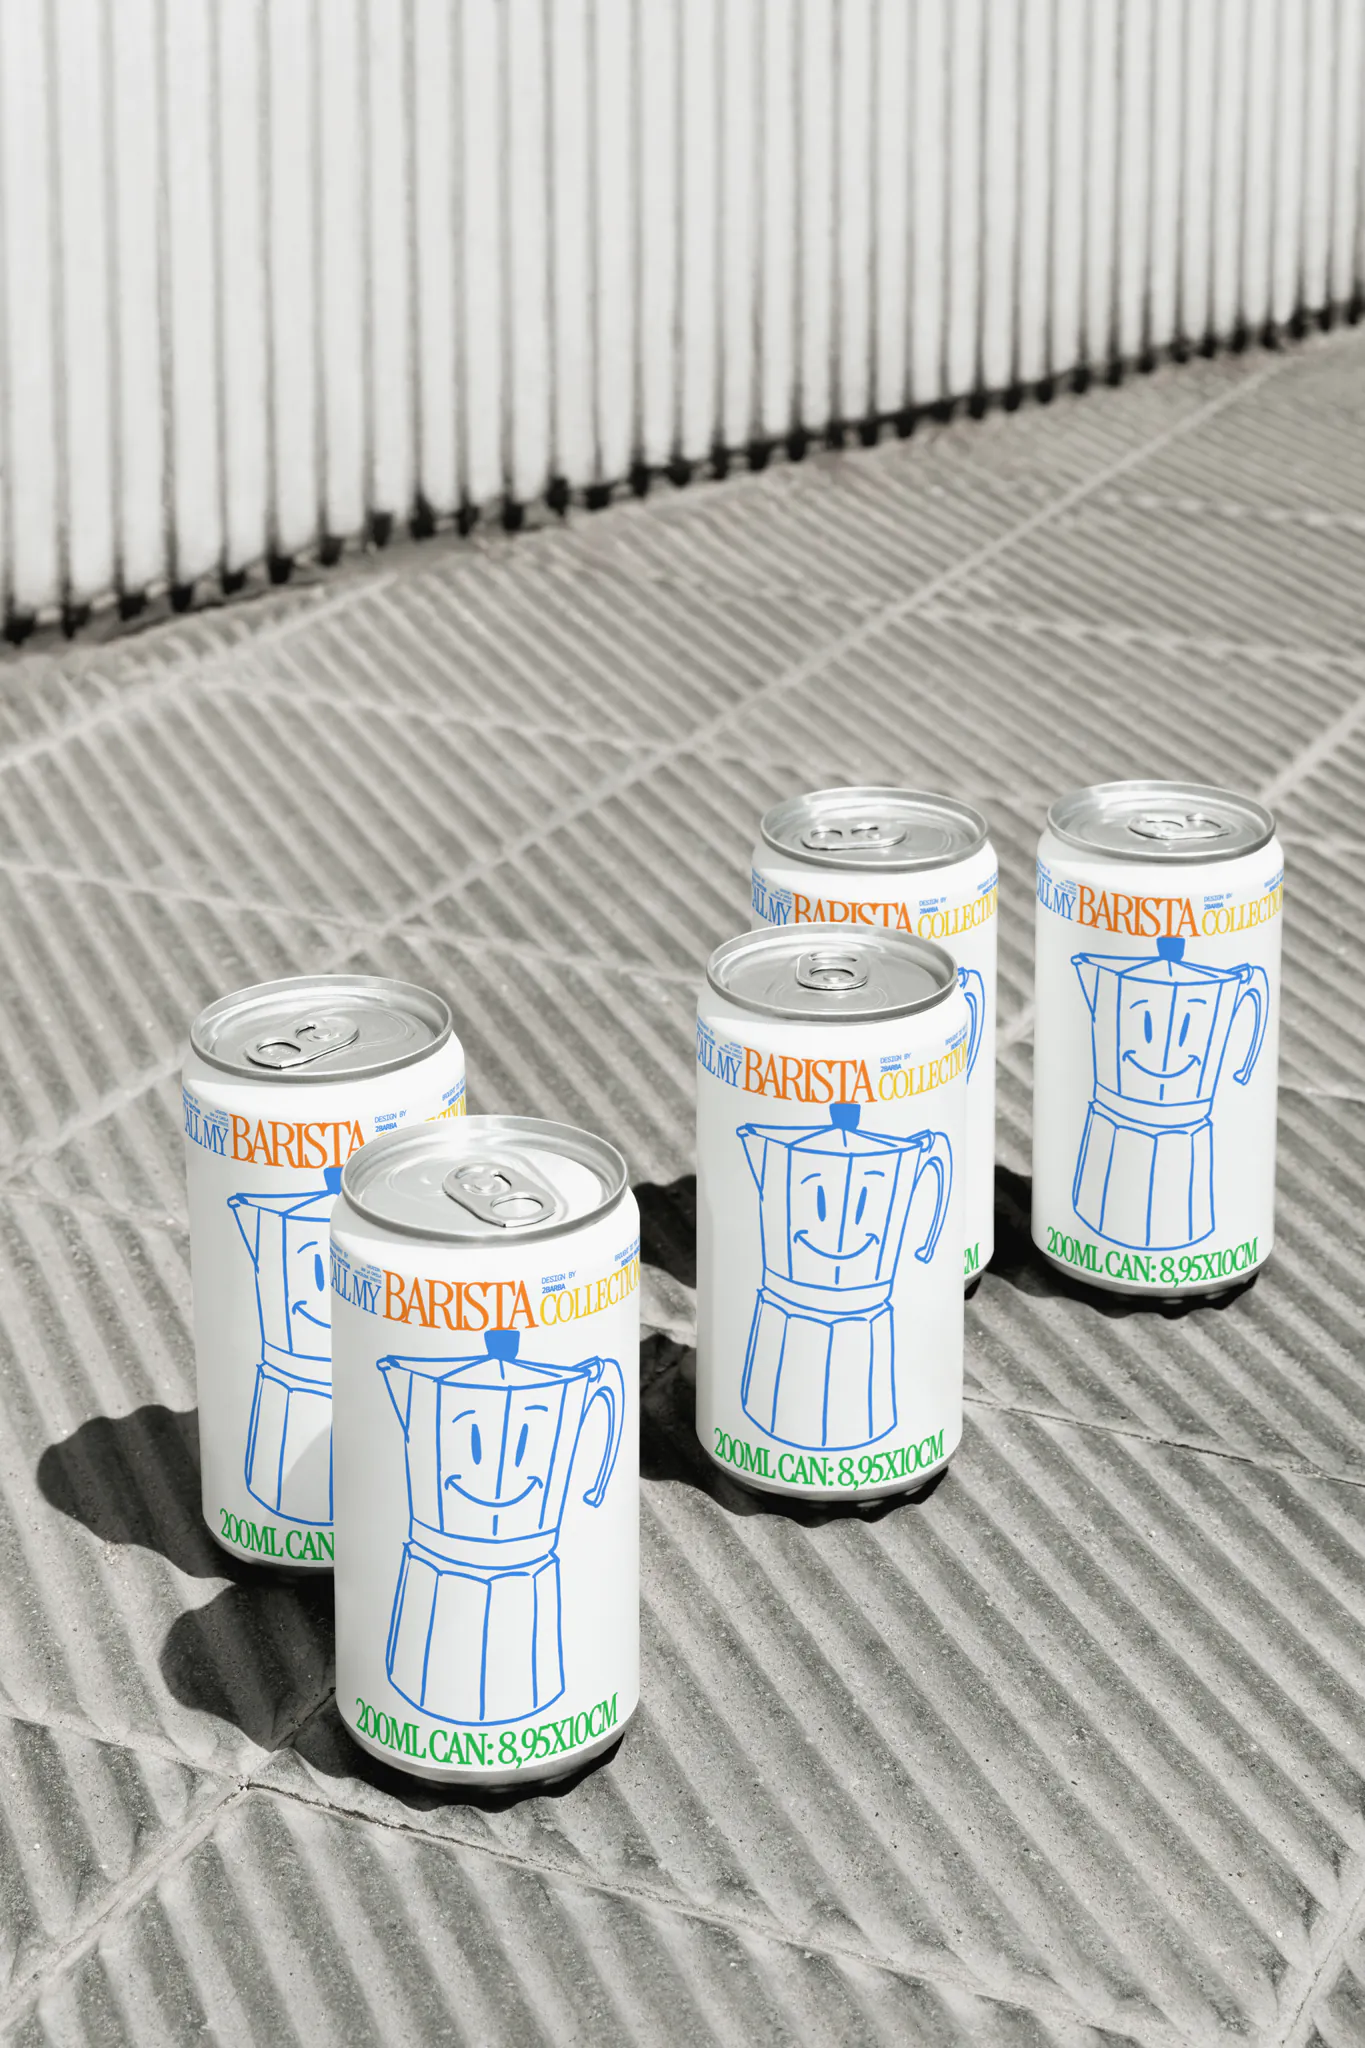 Aluminum can mockups laying on the street, urban scenario, modern style. Pack of aluminum can mockups on concrete surface. Beverage mockup, soft drink can mockup, label mockup, beer can mockup, packaging mockup, cold brew mockups, premium quality.